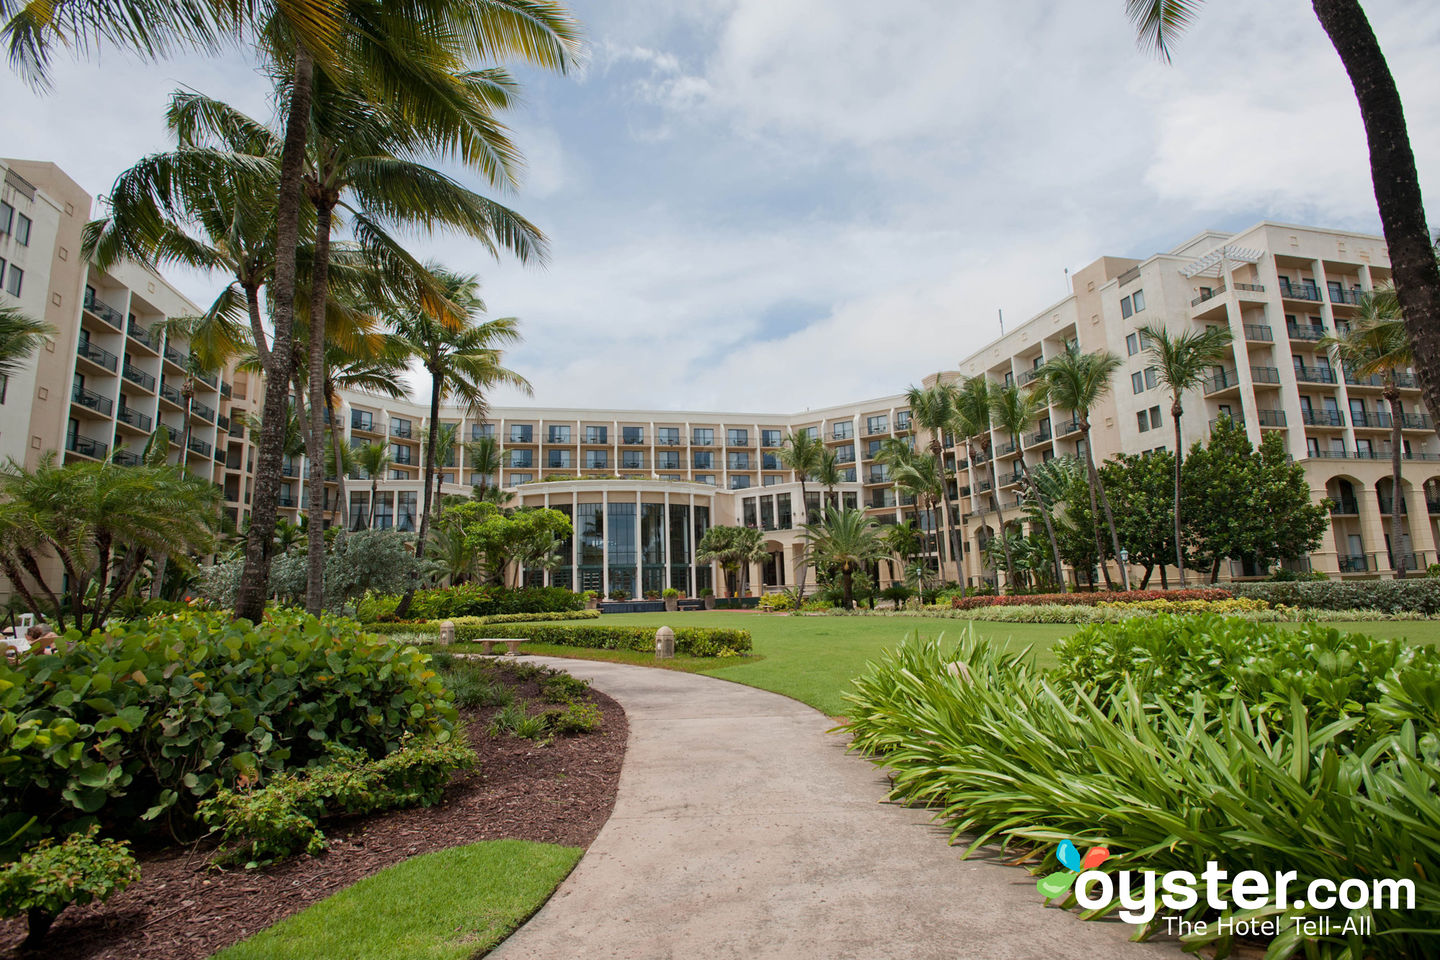 Wyndham Grand Rio Mar Puerto Rico Golf Beach Resort Review What To Really Expect If You Stay